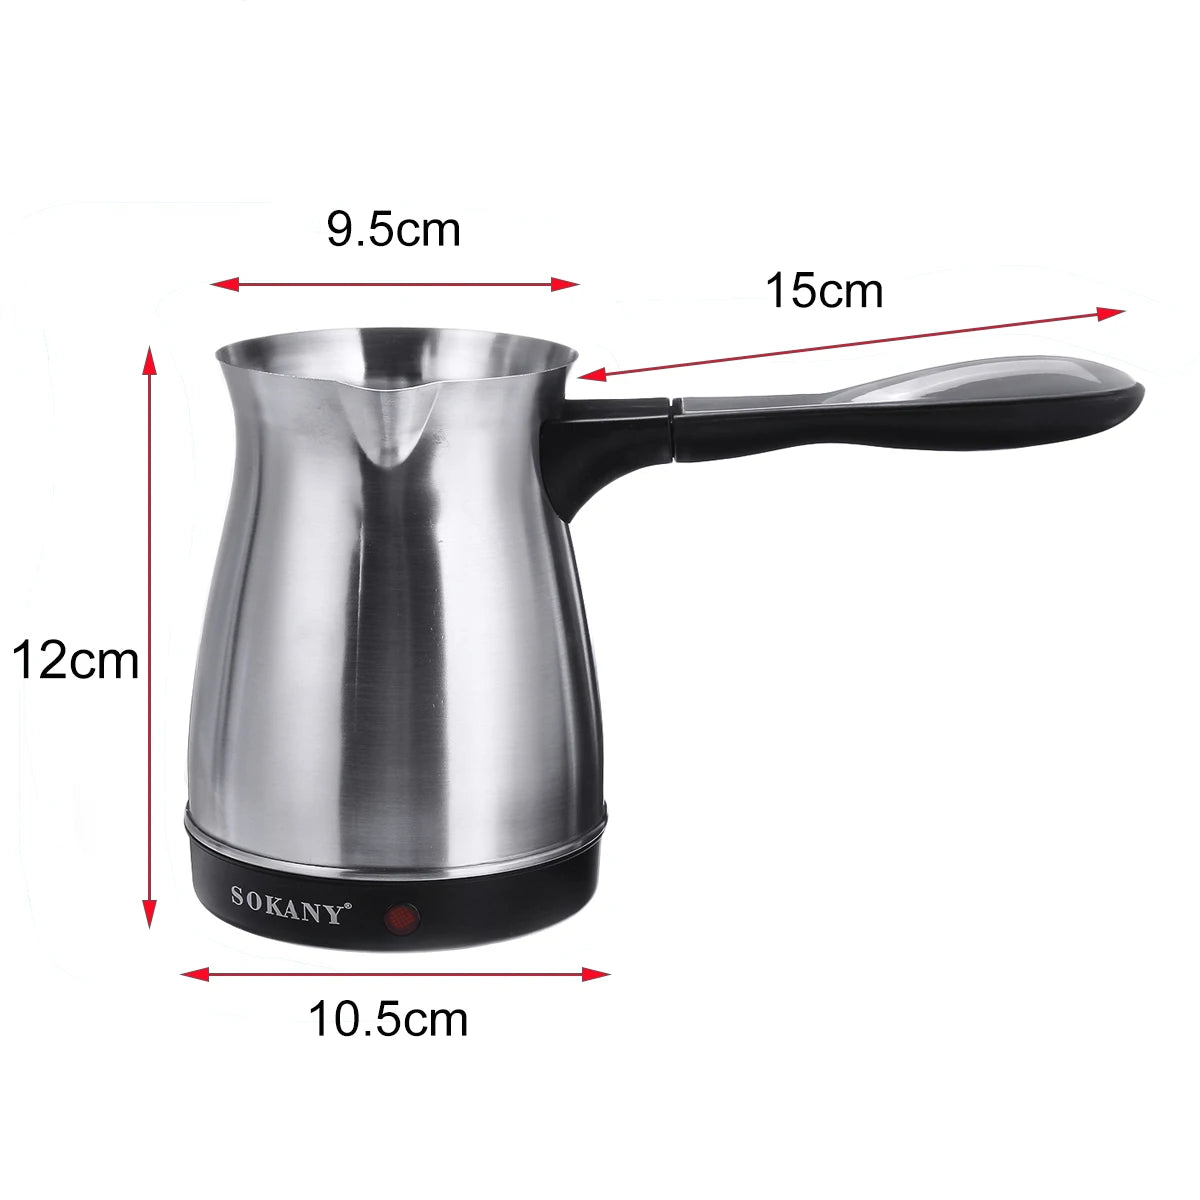 Double Italian Coffee Maker Machine Fully Automatic Milk Frother Bule Pro Vaper Hibrew Nespresso Electric Free Shipping Espresso LUXLIFE BRANDS